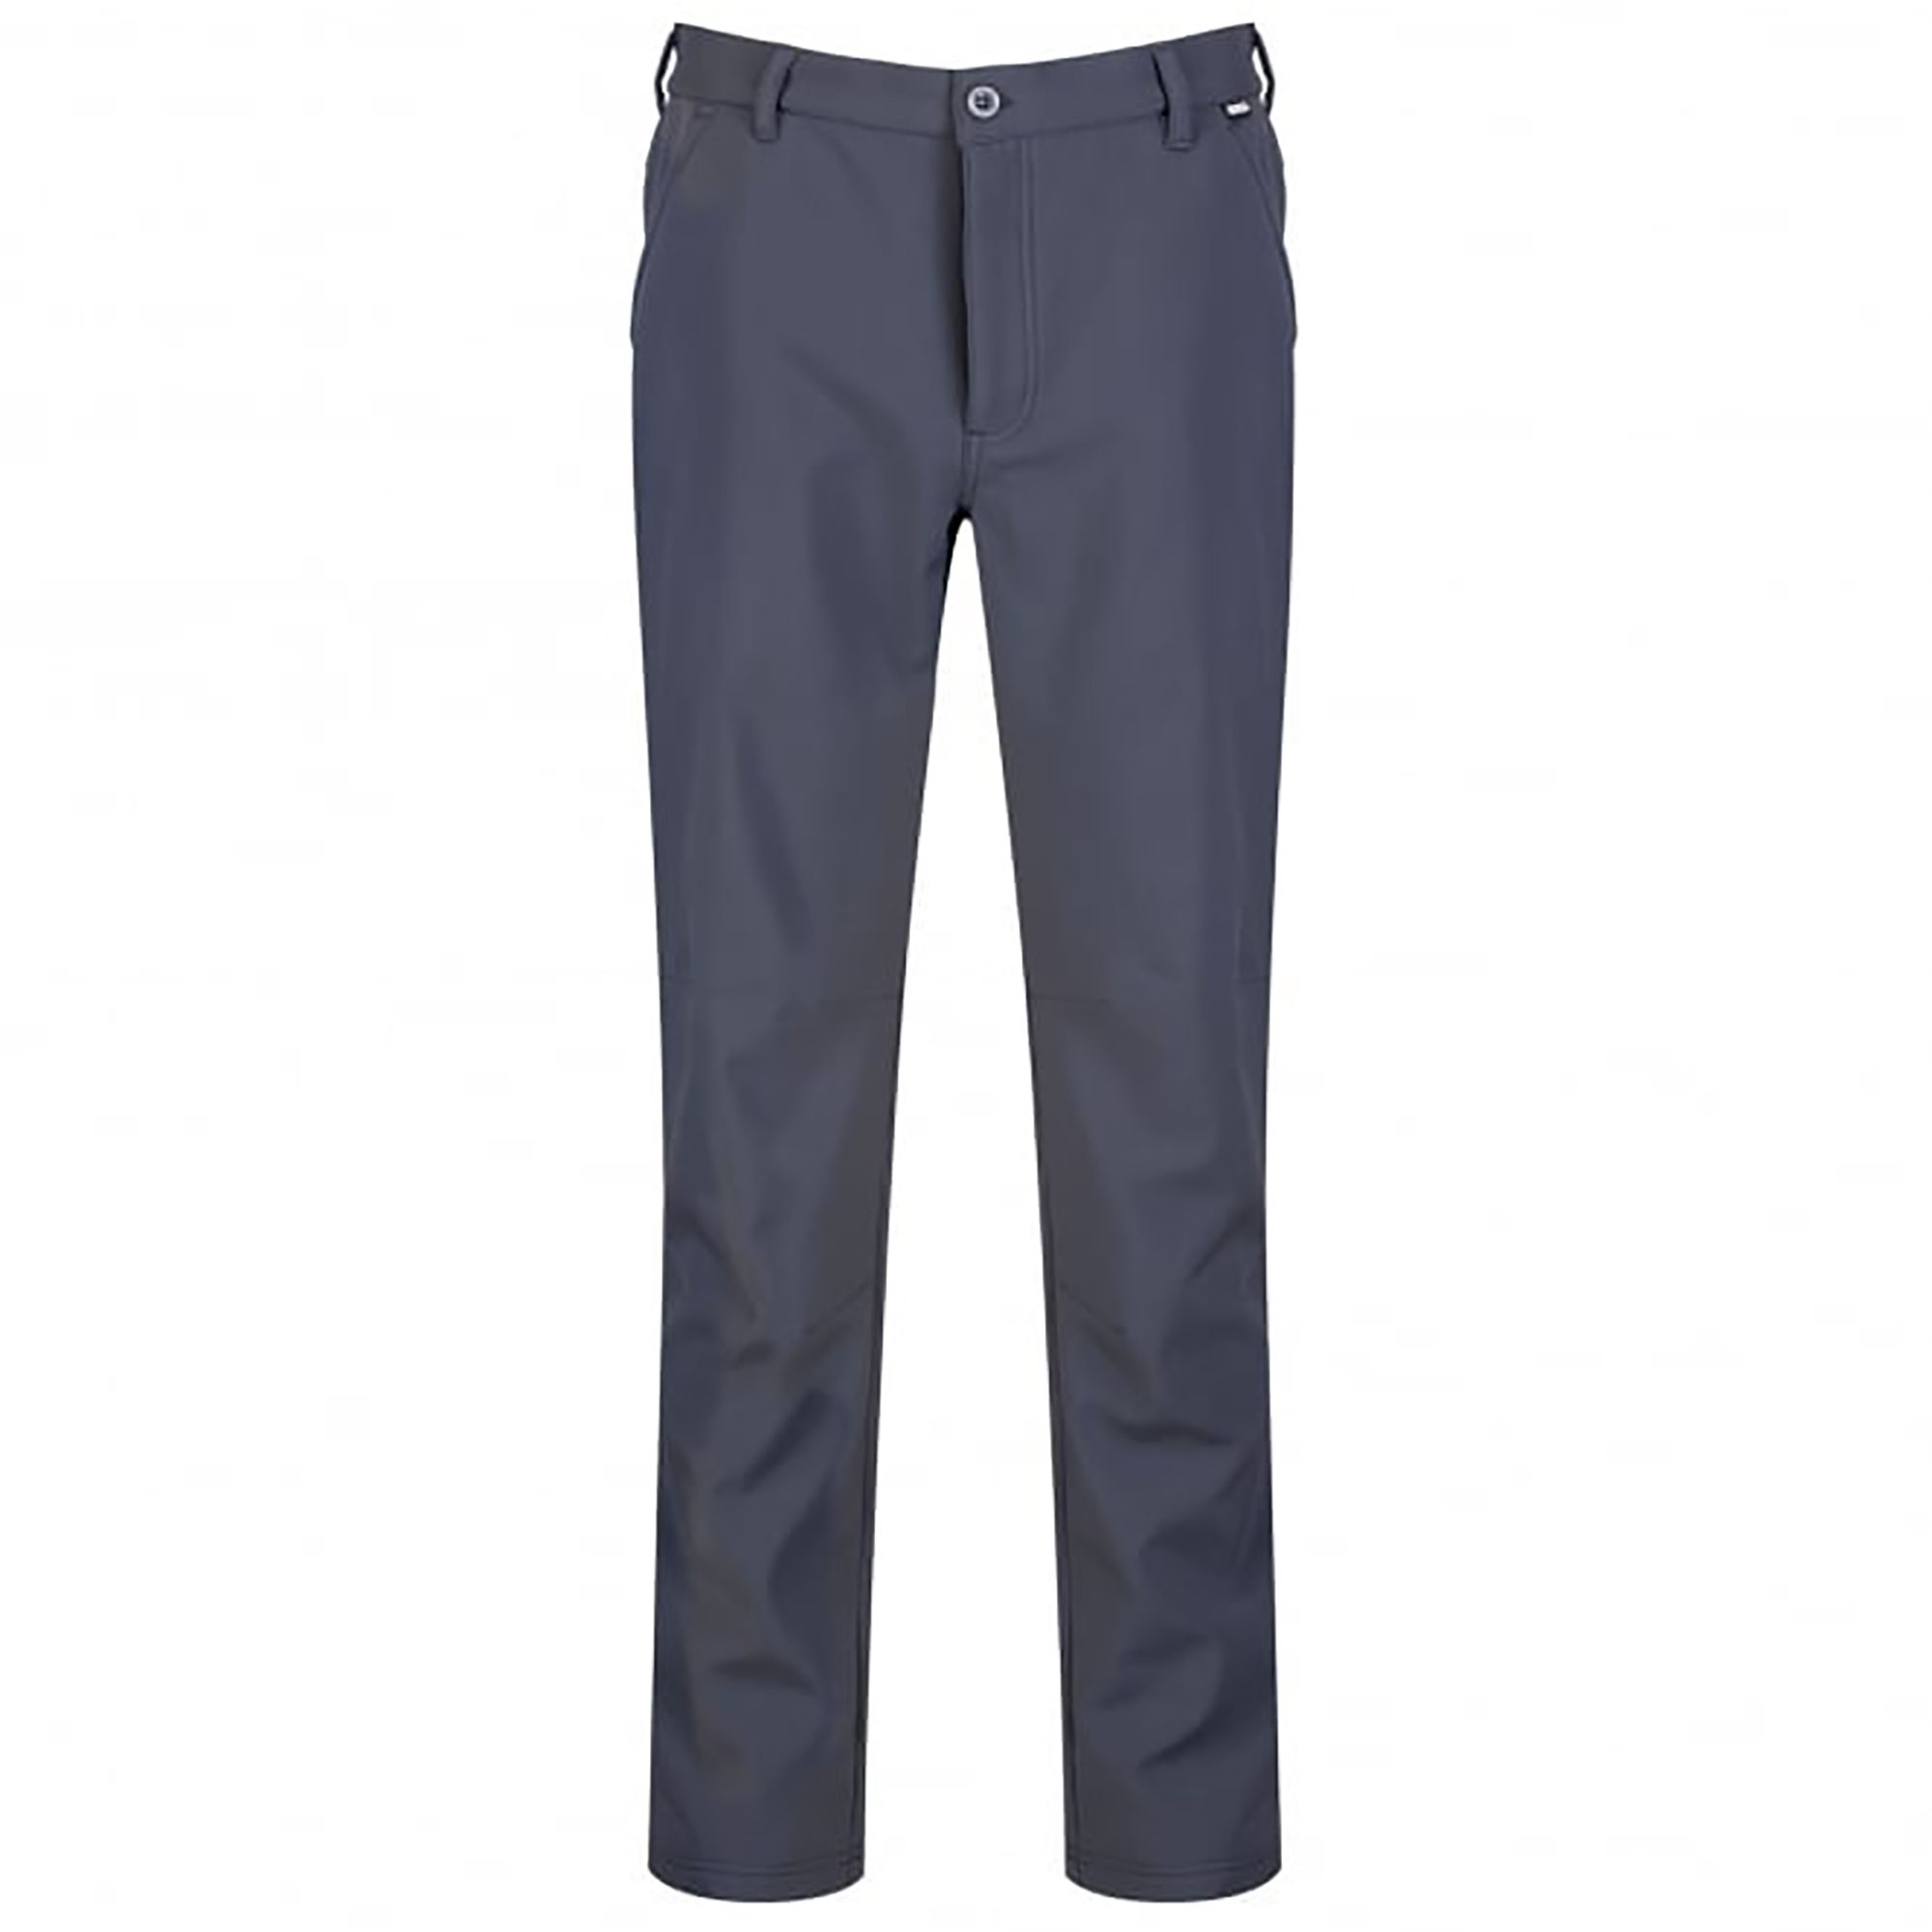 Mens trousers. Lightweight. Durable. Water repellent. Wind resistant. Part elasticated waist. Multiple pockets. Fabric: 96% Polyester, 4% Elastane. Regatta Mens sizing (waist approx): 26in/66cm, 28in/71cm, 30in/76cm, 32in/81cm, 33in/84cm, 34in/86.5cm, 36in/91.5cm, 38in/96.5cm, 40in/101.5cm, 42in/106.5cm, 44in/111.5cm, 46in/117cm, 48in/122cm, 50in/127cm. Leg length: S - 30ins, R - 32ins, L - 34ins.